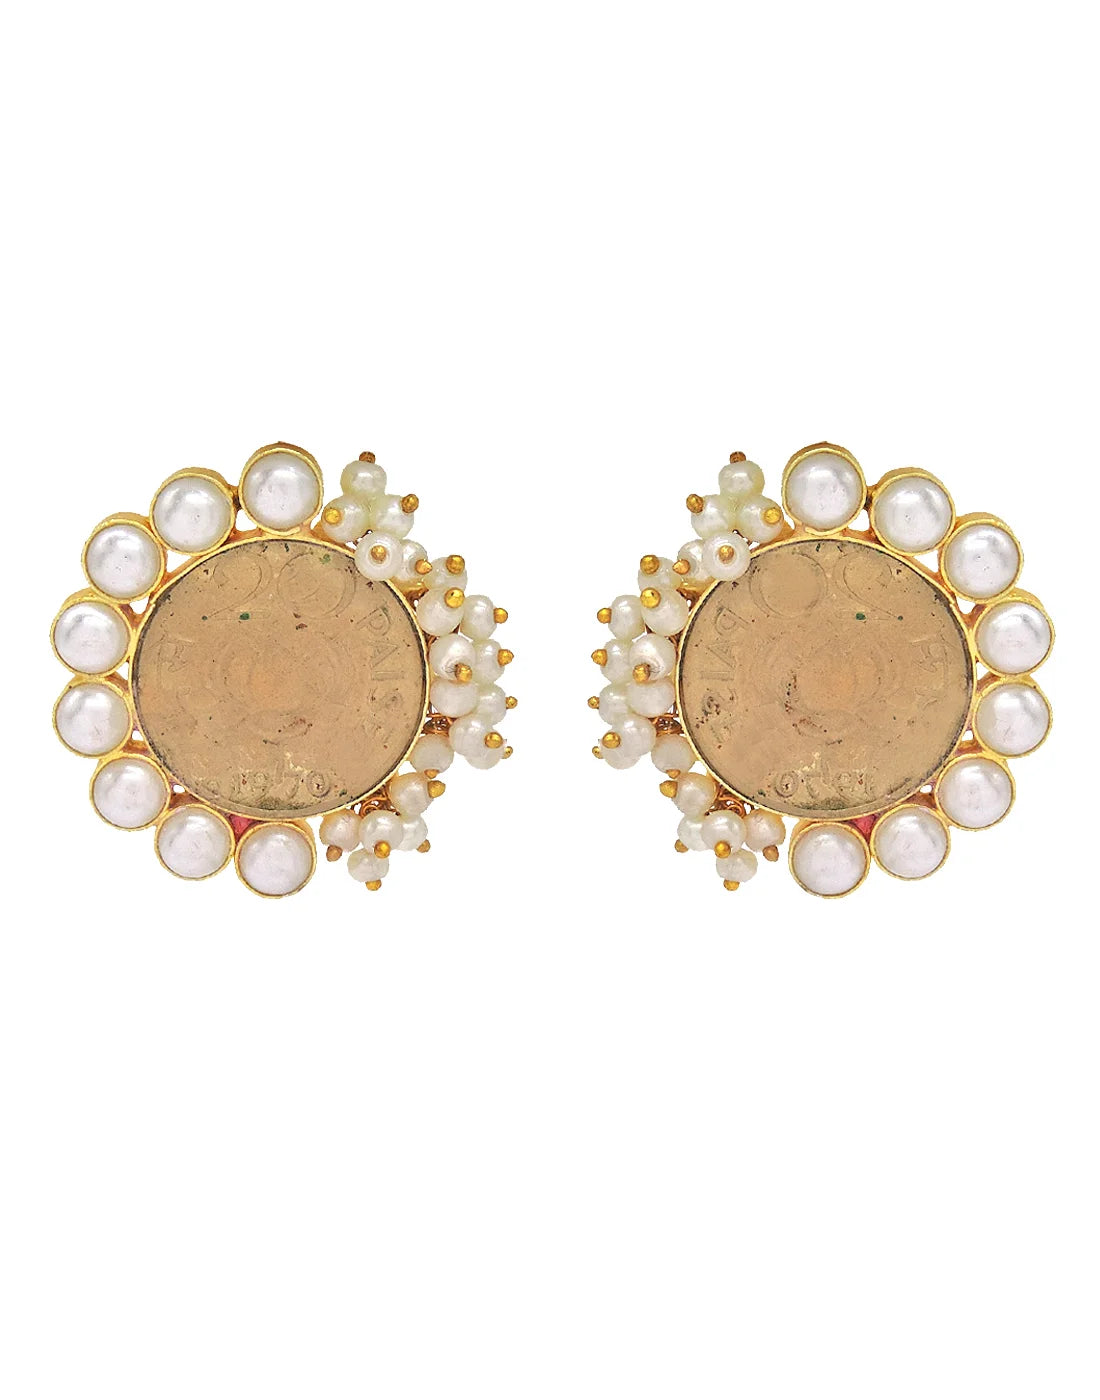 Coin Half Bloom Earrings- Handcrafted Jewellery from Dori